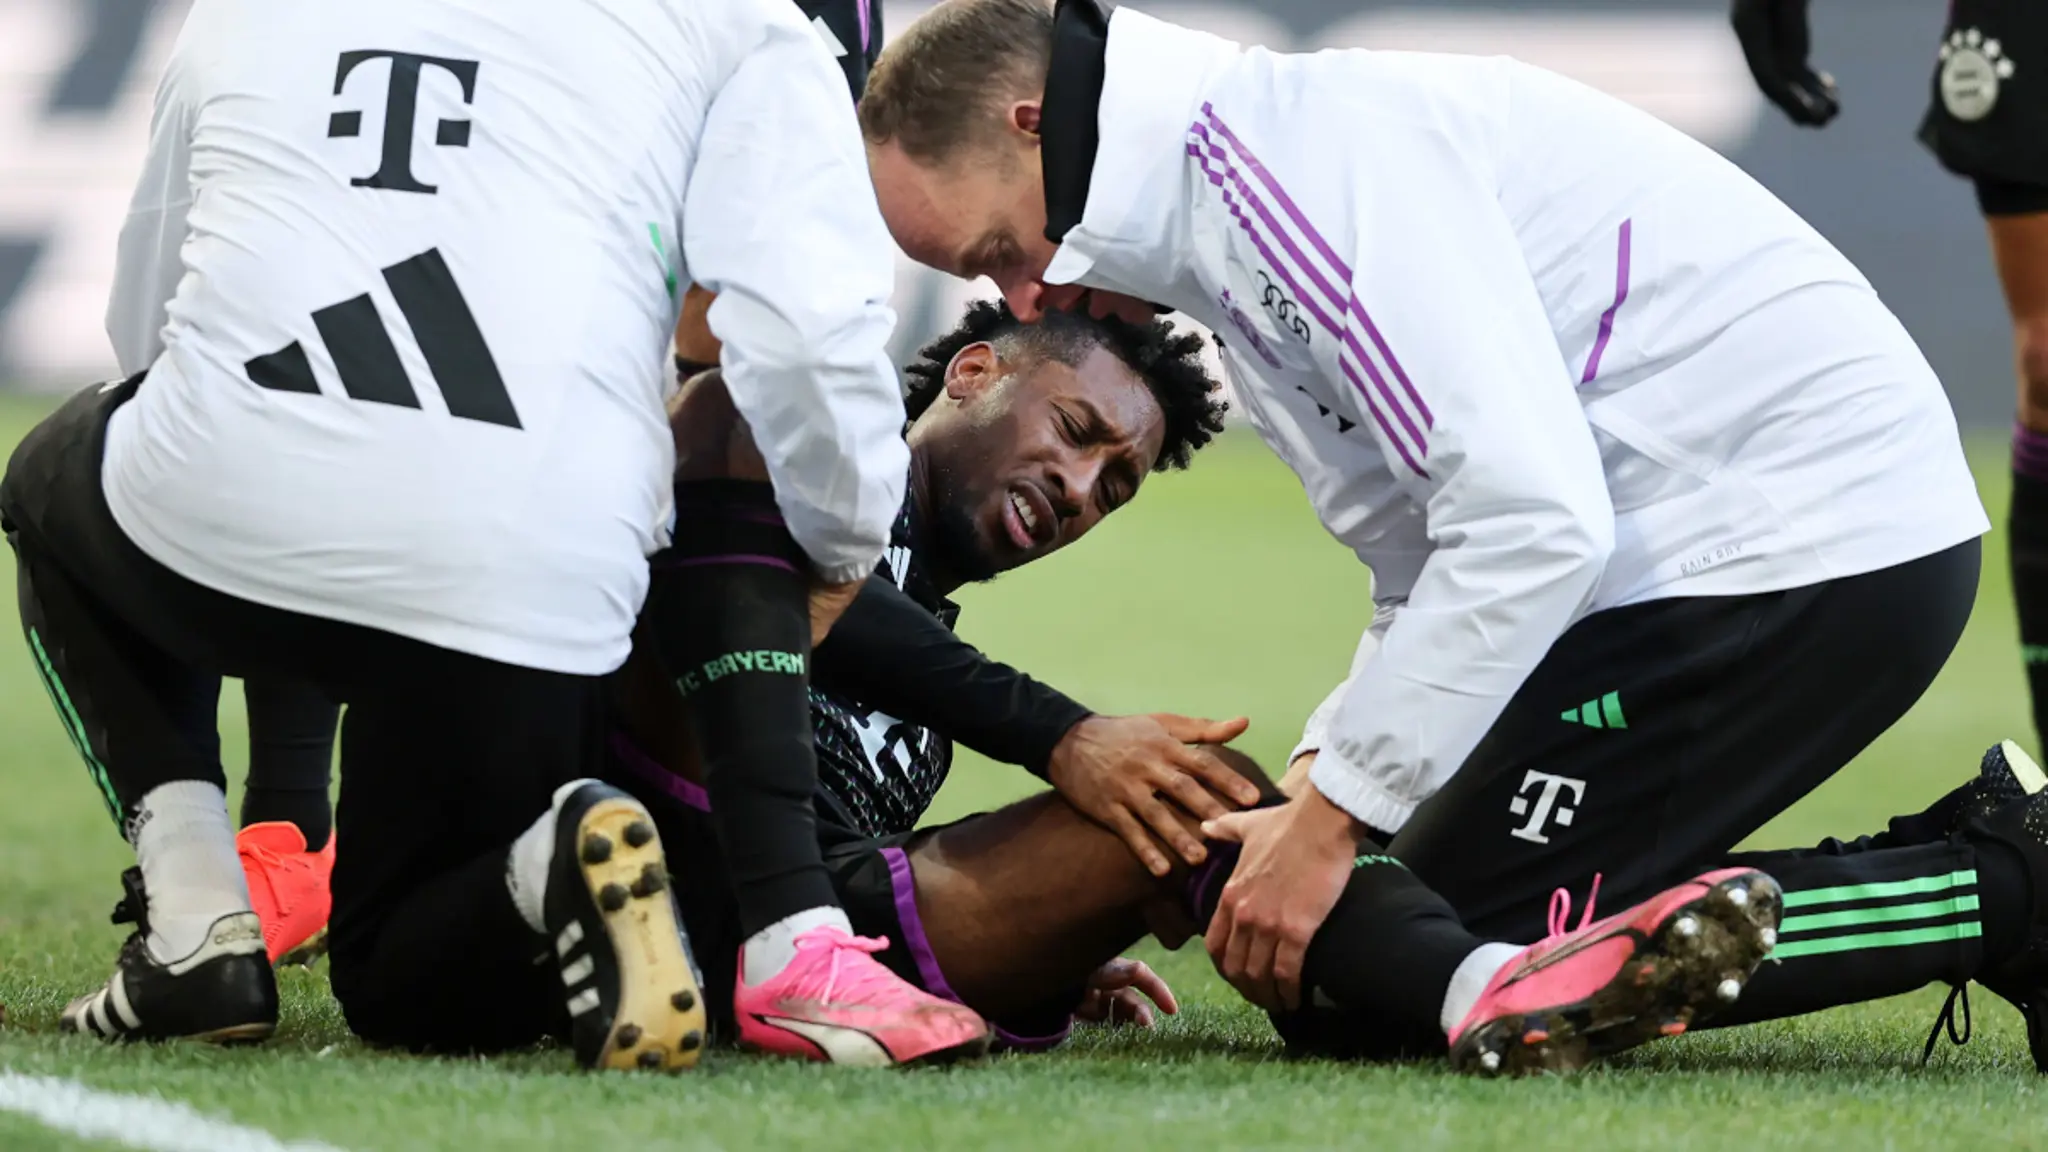 Coman in 'extreme pain', sidelined for 'coming weeks' | SuperSport